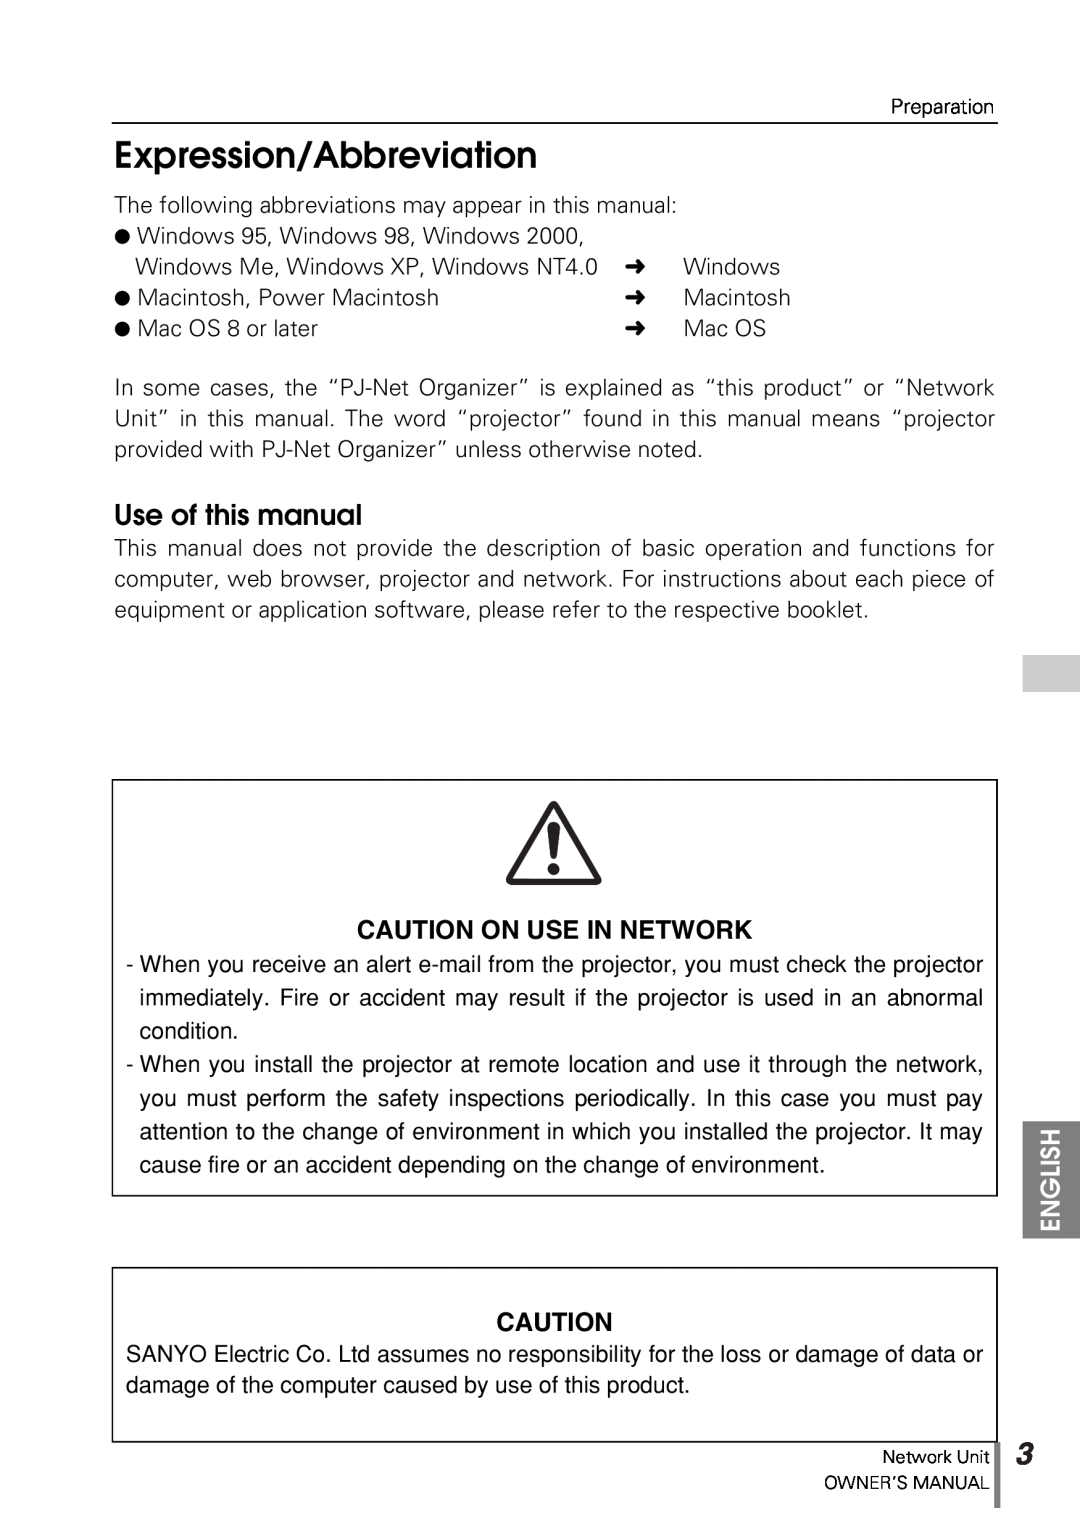 Sanyo POA-PN10 owner manual Expression/Abbreviation, Use of this manual, Caution On Use In Network 